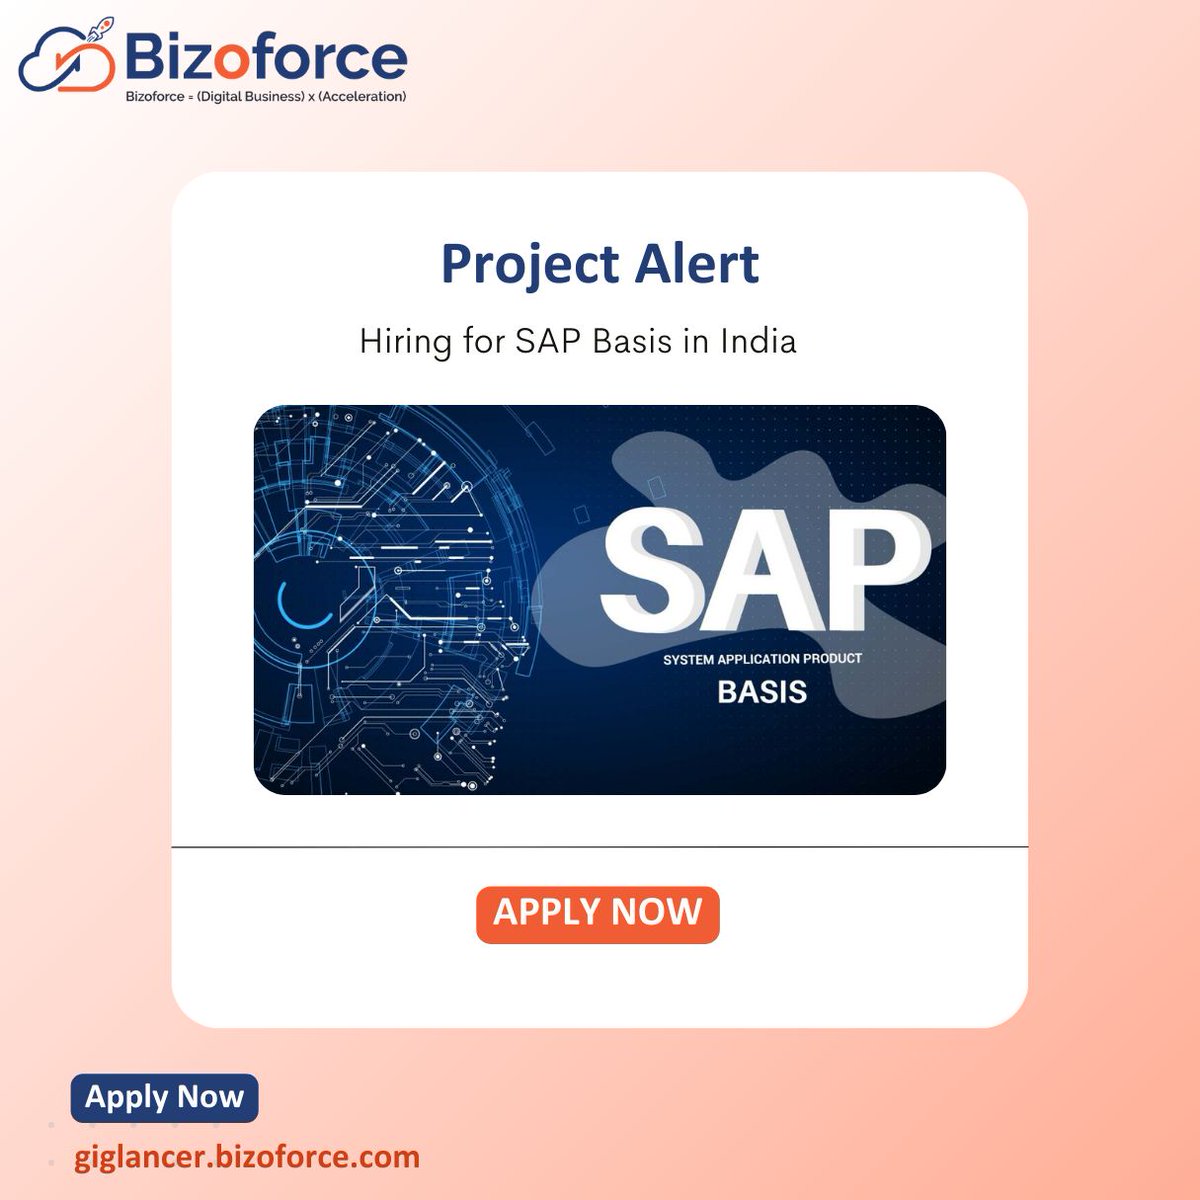 🚀 Exciting Job Opportunity for all SAP Basis experts in India! Apply now on Giglancer and let's shape the future together! 

Apply Now - buff.ly/3QteQPE

#SAPBasis #HiringIndia #Giglancer #job